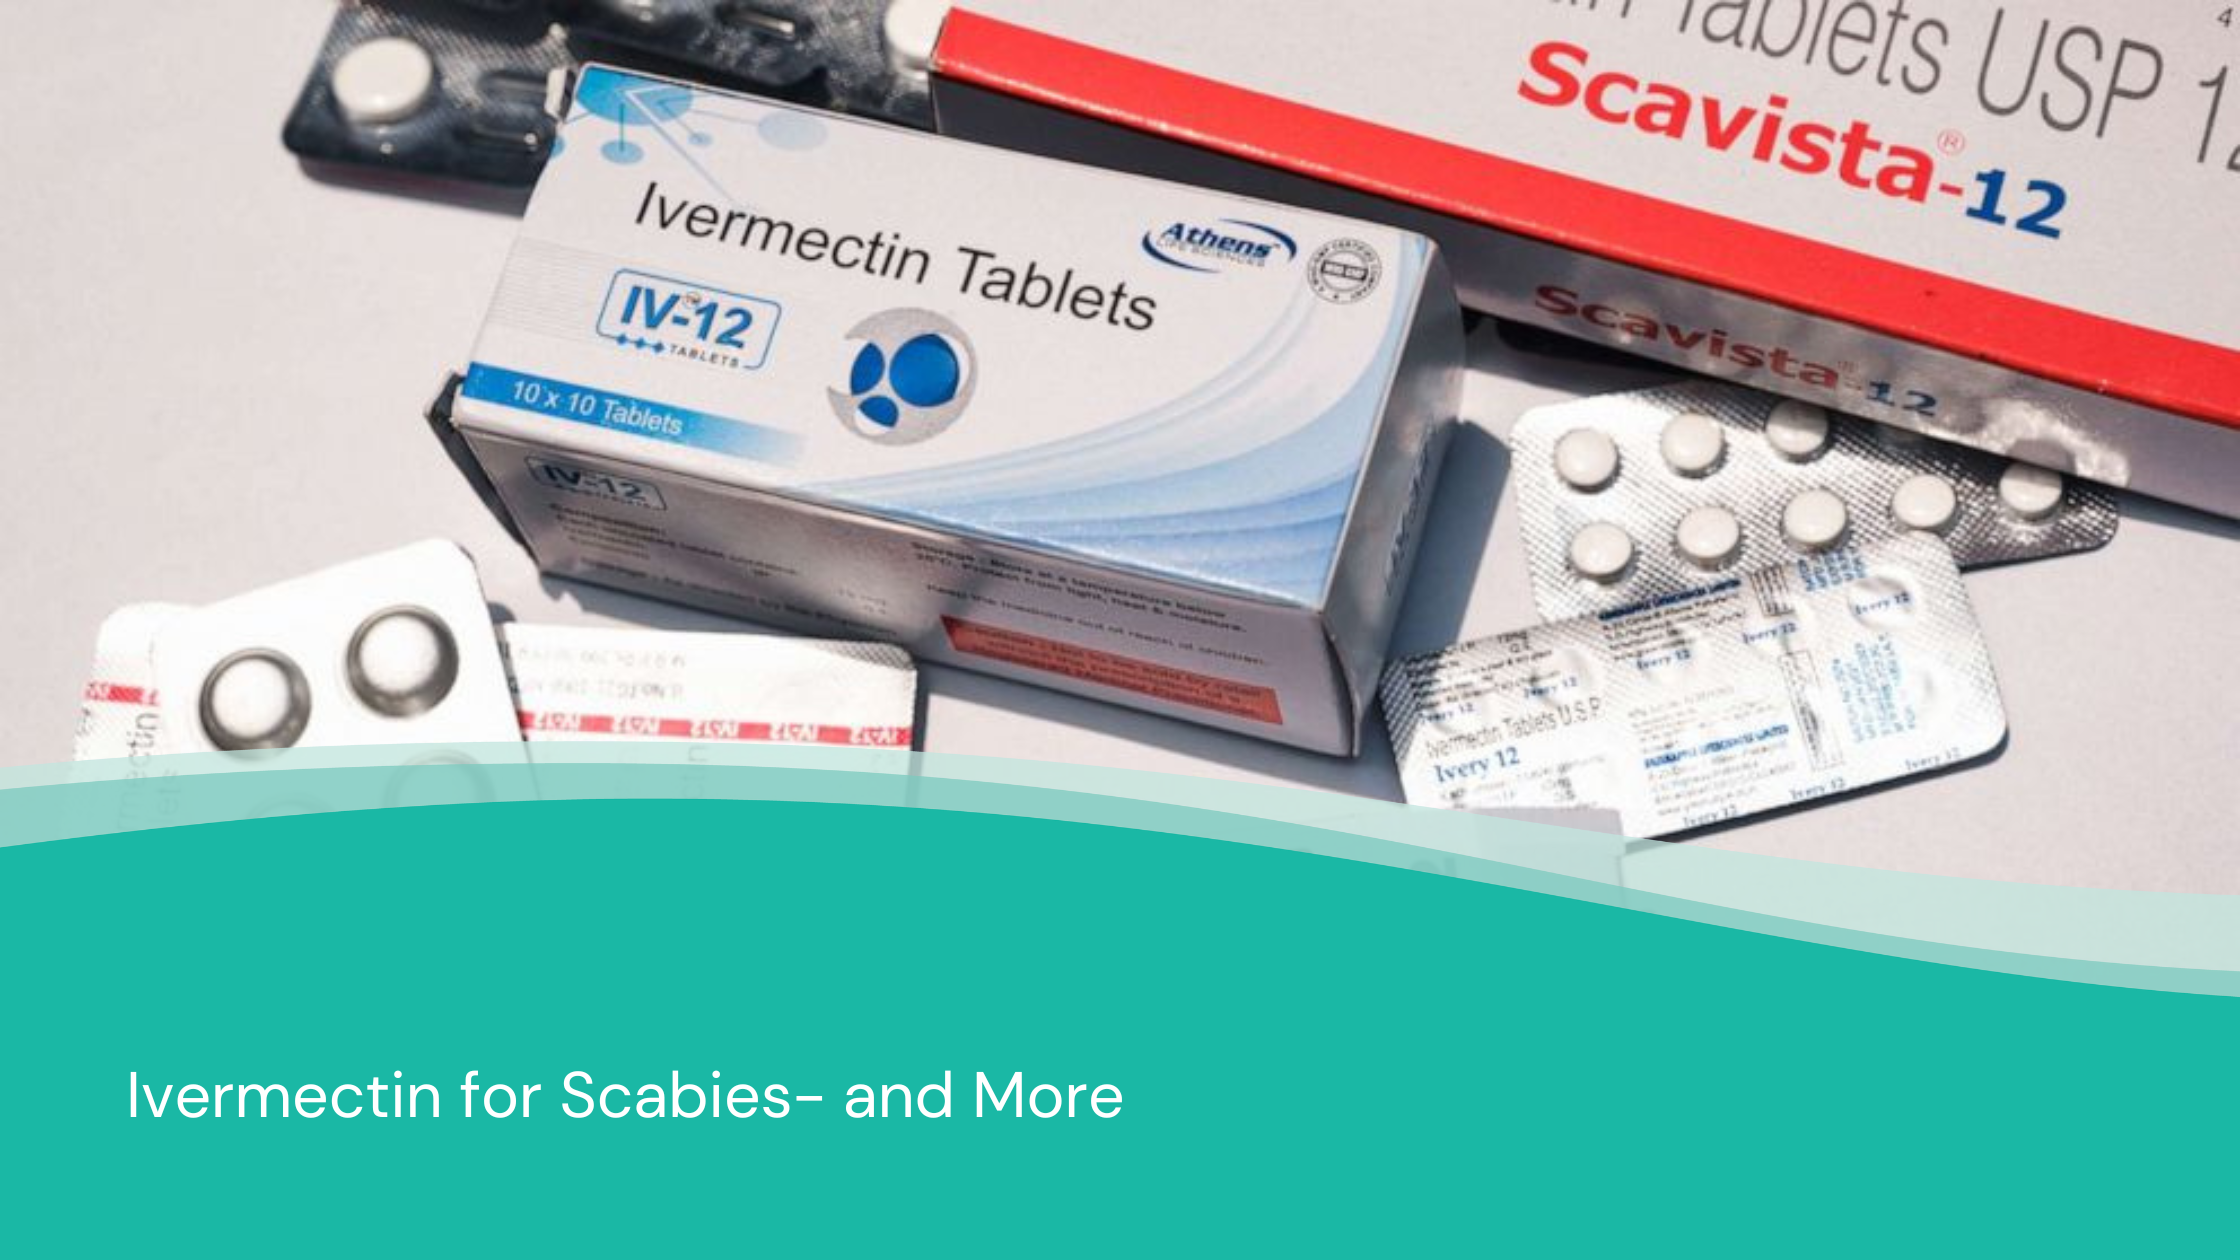 Ivermectin for Scabies- and More